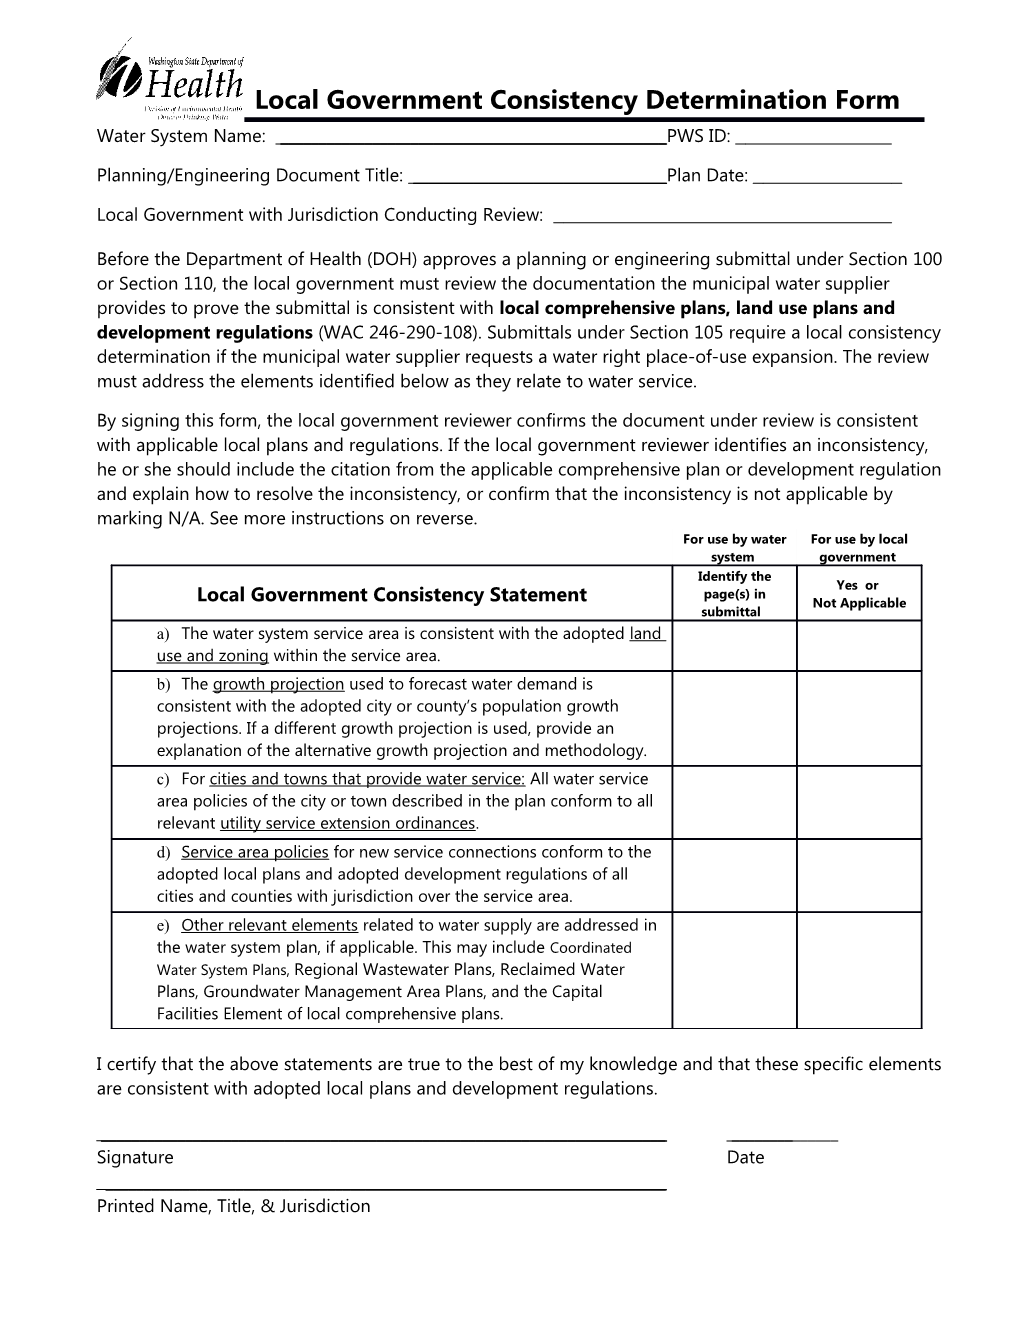 Local Government Consistency Determination Form